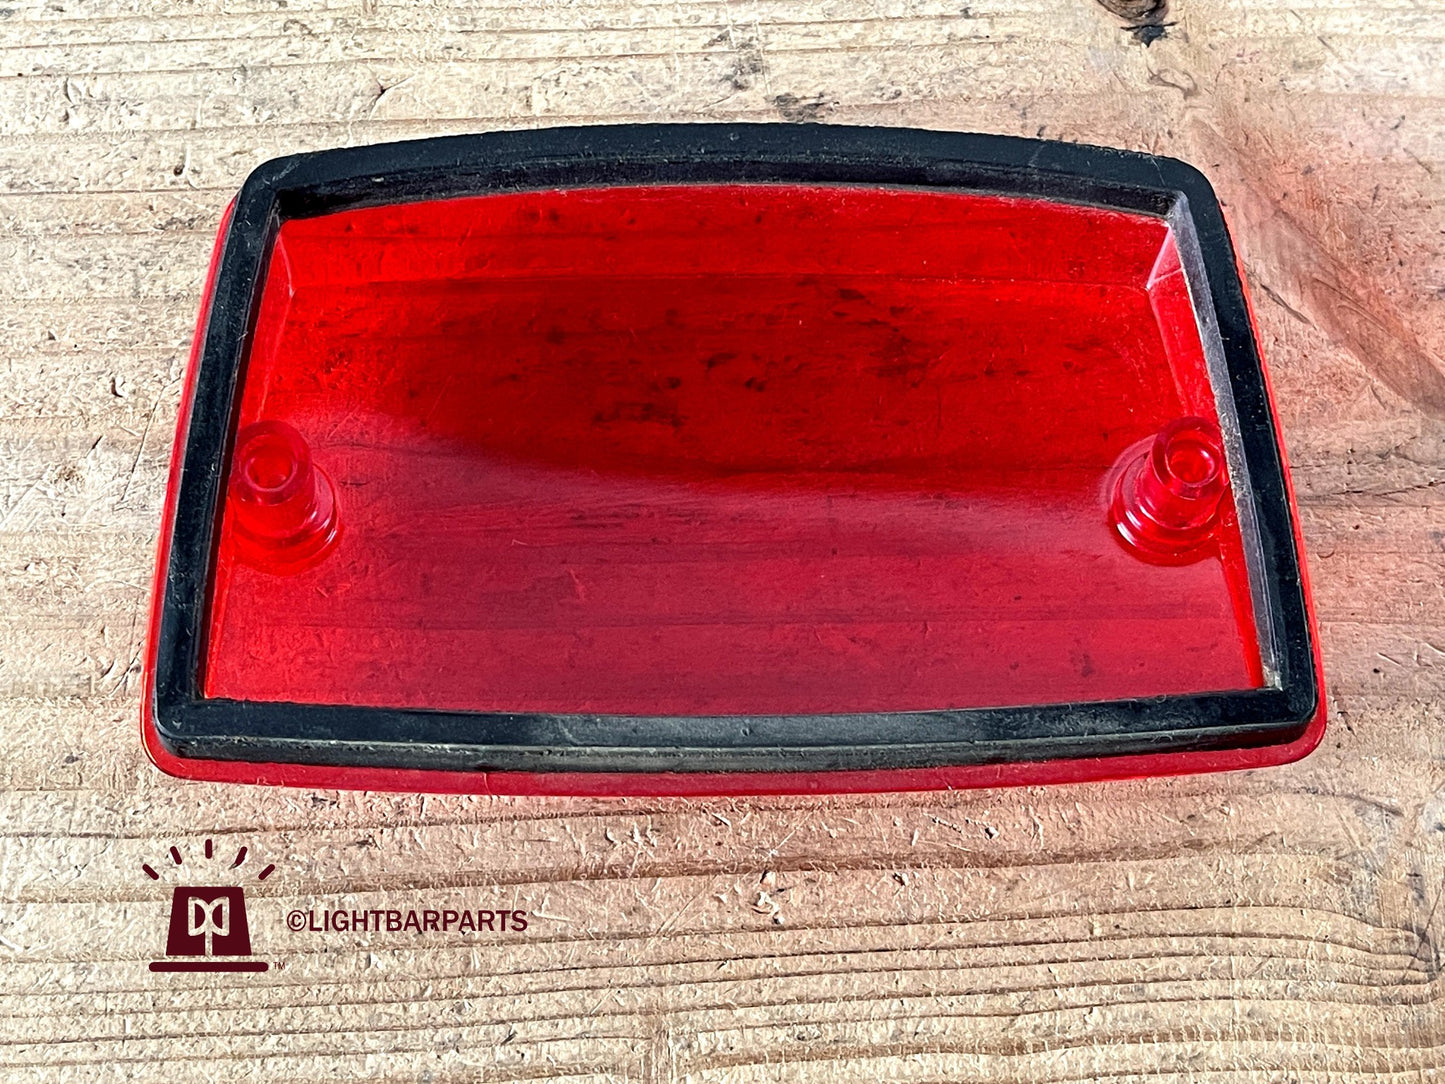 Federal Signal StreetHawk Lightbar - New Style RED Secondary Lens with Gasket